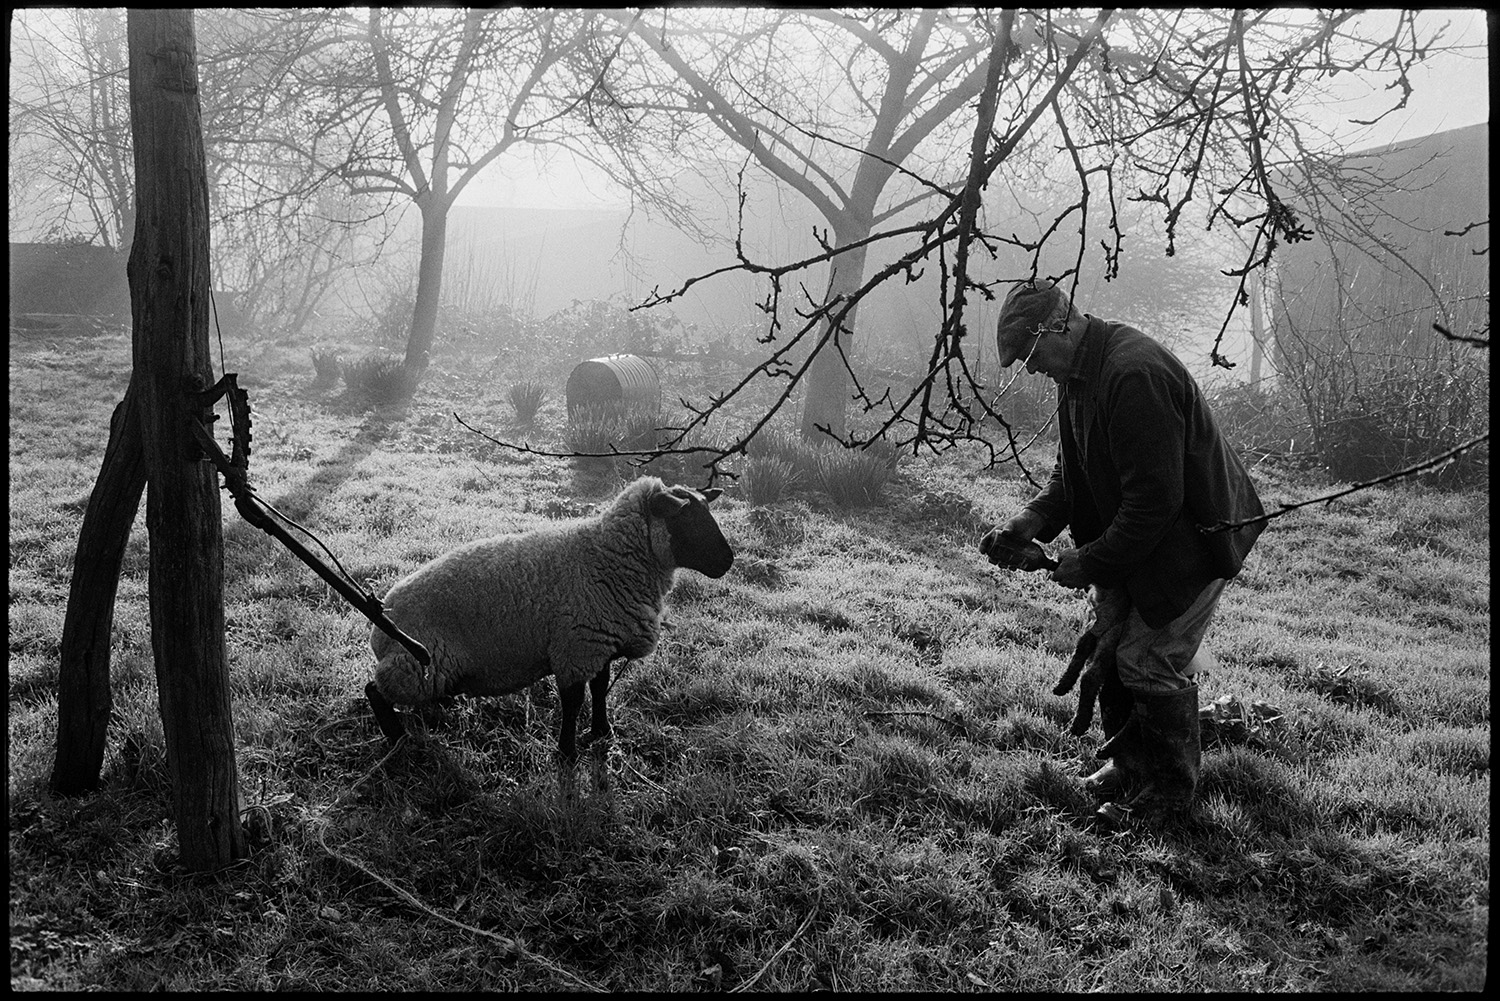 Farmer with ewe and lamb, orchard, early morning sun.
[Alf Pugsley feeding a lamb from a bottle, with it's mother watching, in an orchard at Lower Langham, Dolton. Early morning sun is coming through the apple trees with farm buildings in the background.]